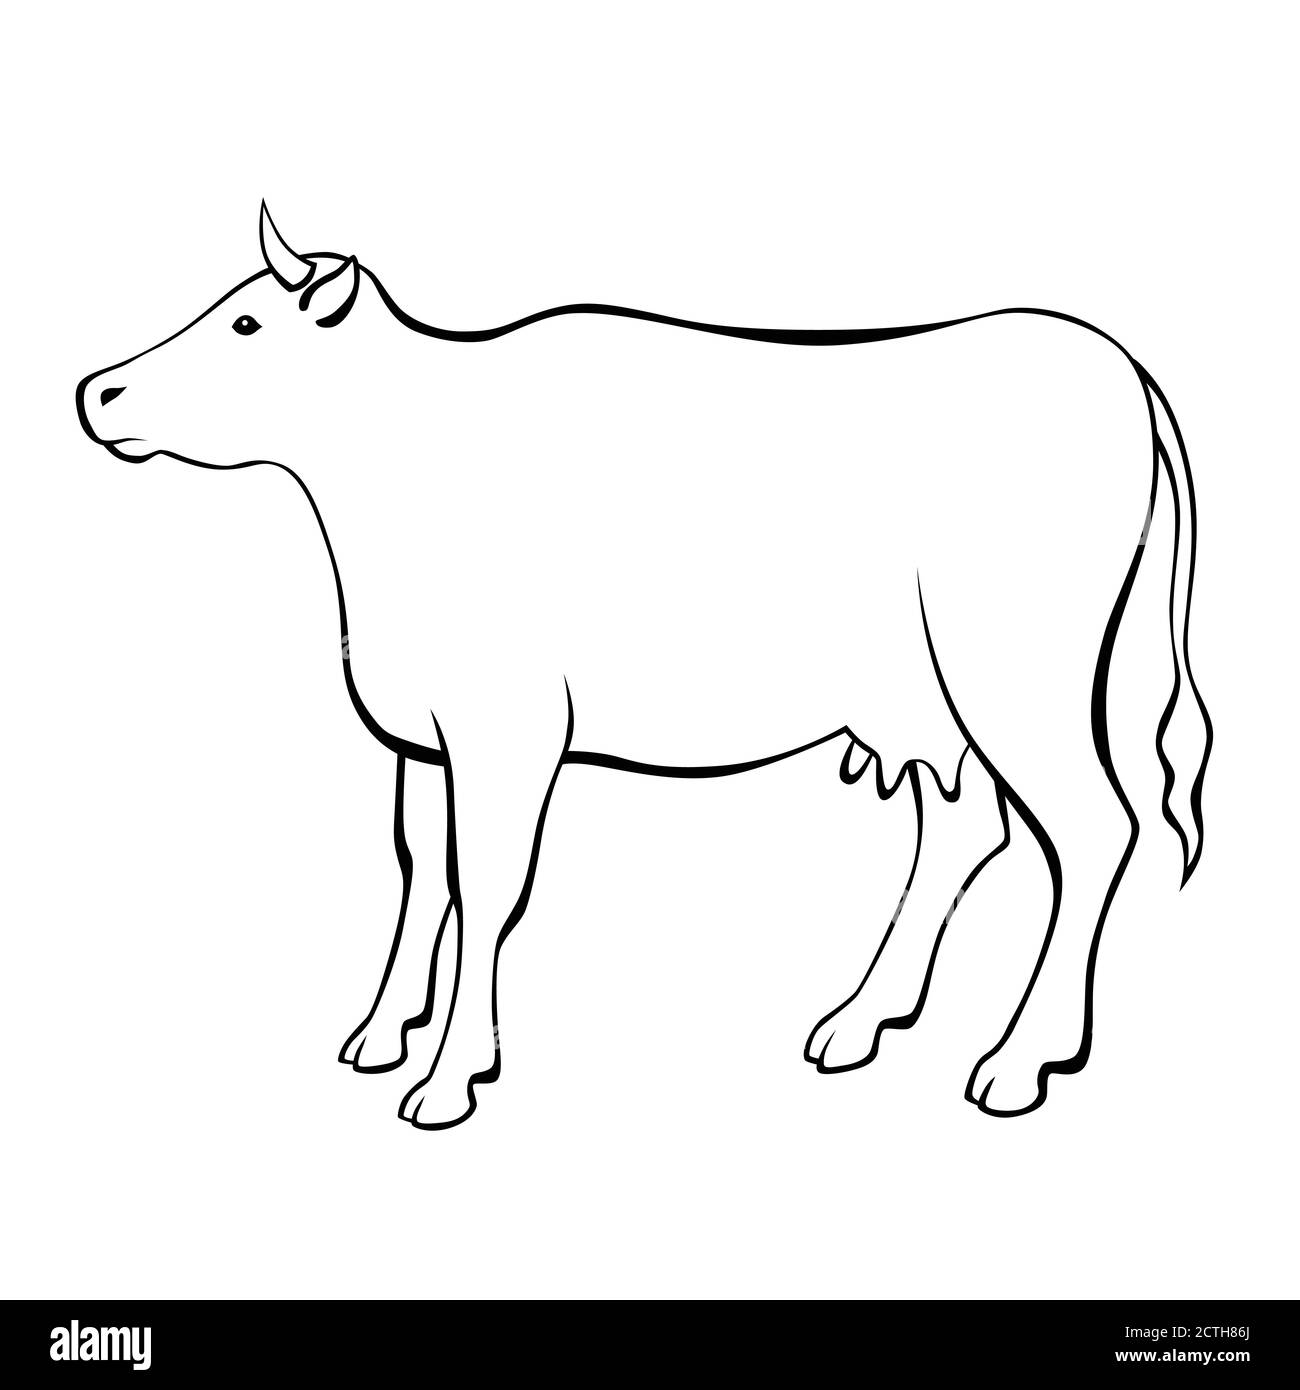 Cow black white isolated illustration vector Stock Vector